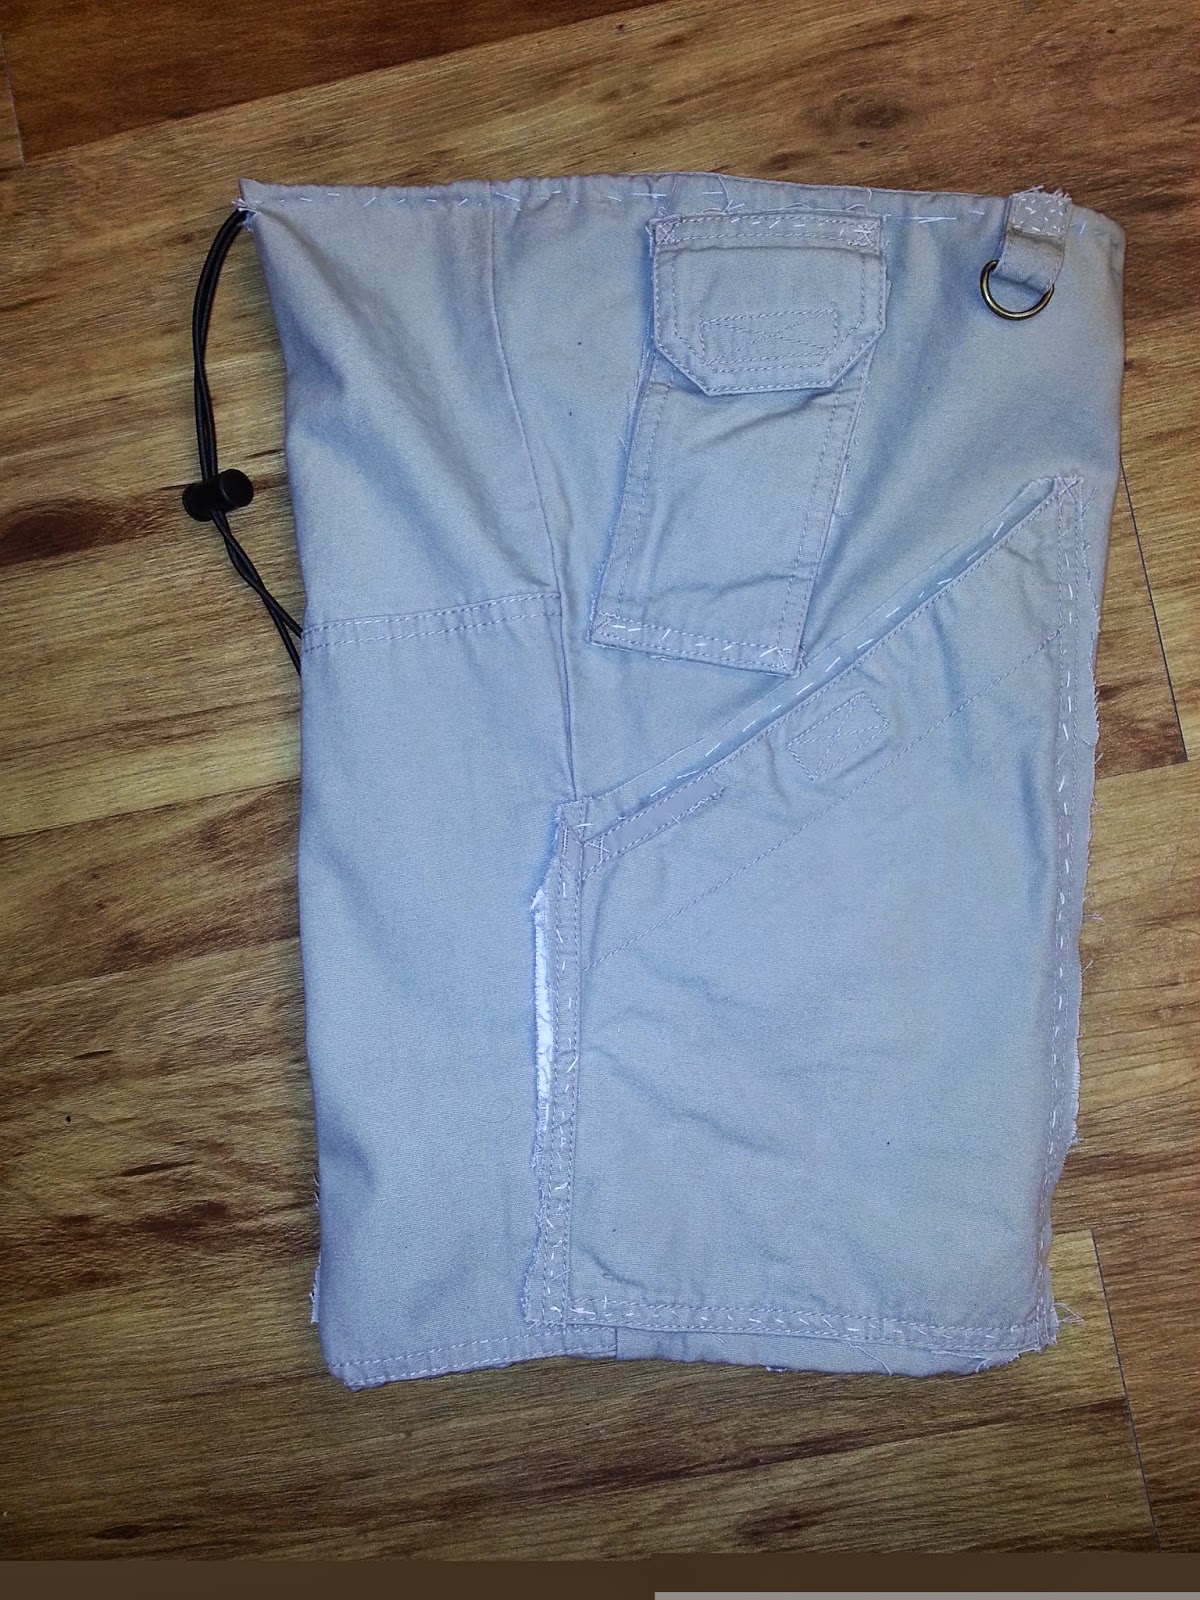 The 7 P's Blog: Handmade Ditty Bag From Old Cargo Pants